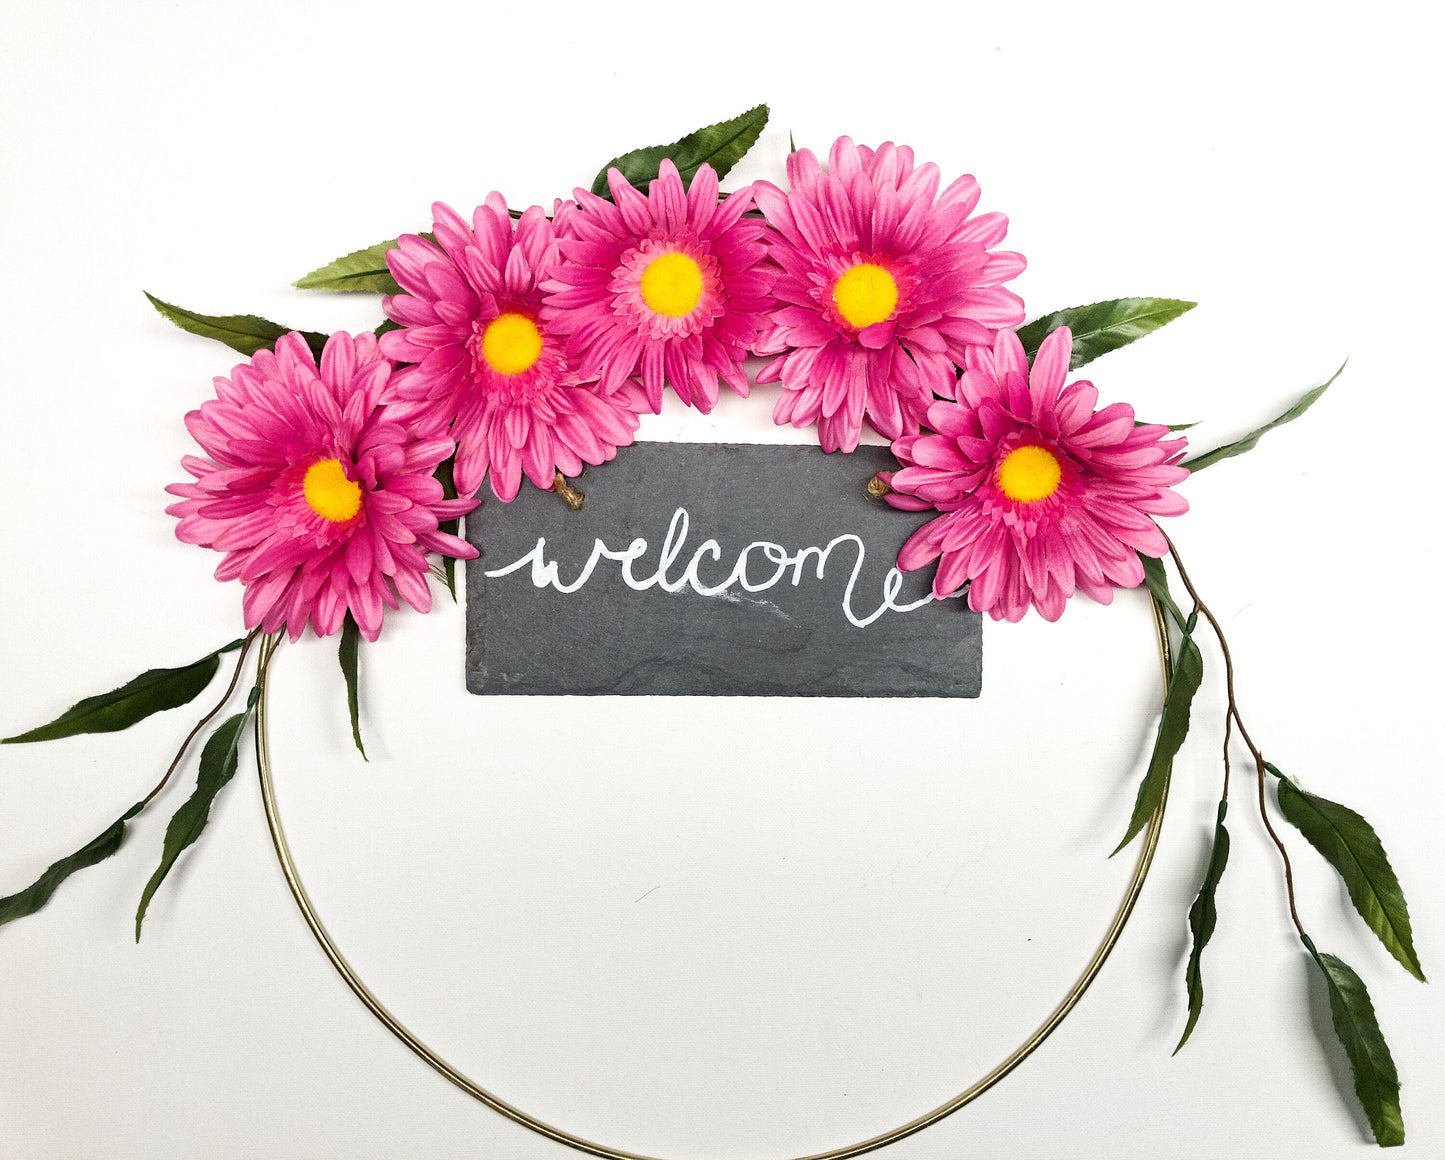 Metal Ring Wreath, Daisy, #107, Pink Daisies, Welcome Sign, Simple, Summer, Spring, Wall, Door, Nursery, Modern. Small, Indoor, Gold Natural